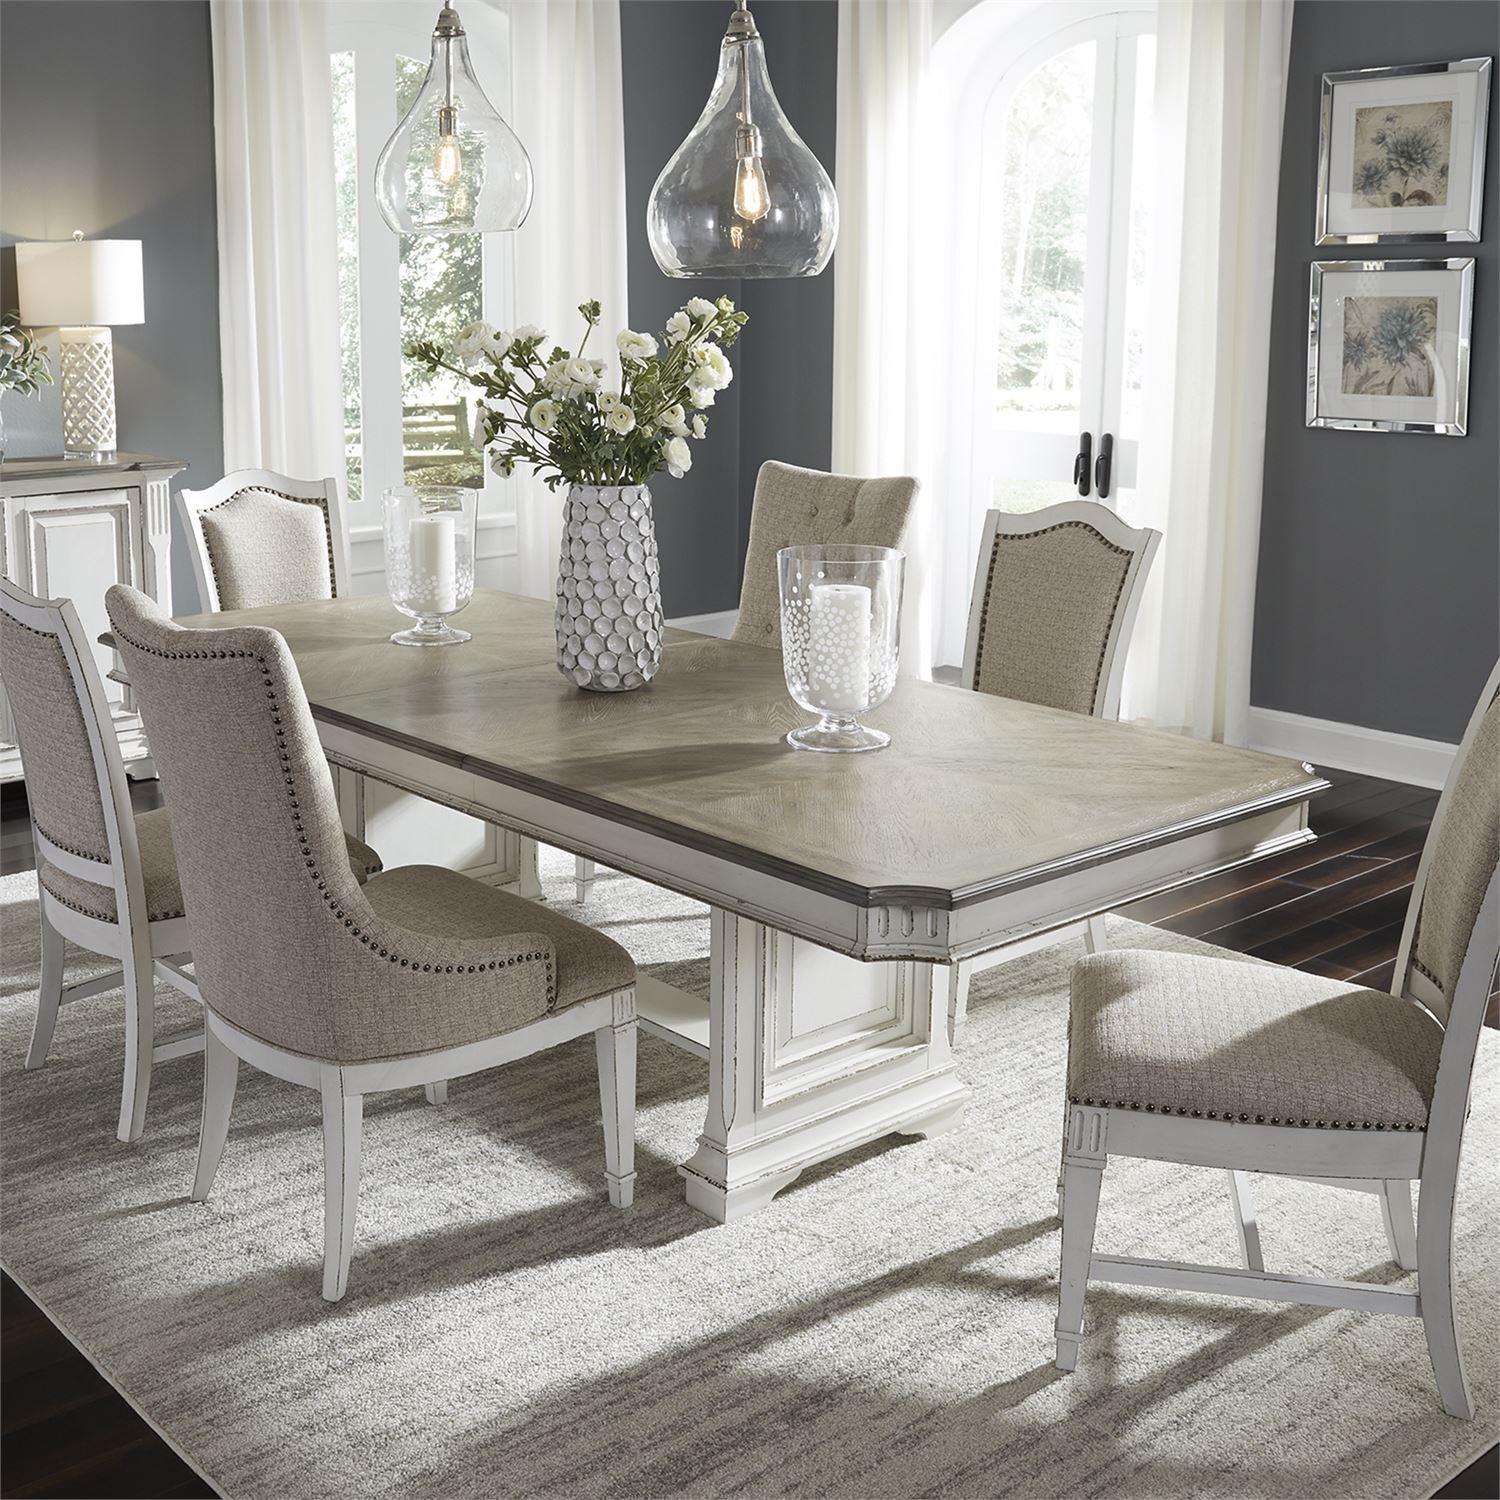 Traditional Dining Room Set Abbey Park 520-DR-7TRS 520-DR-7TRS in White 